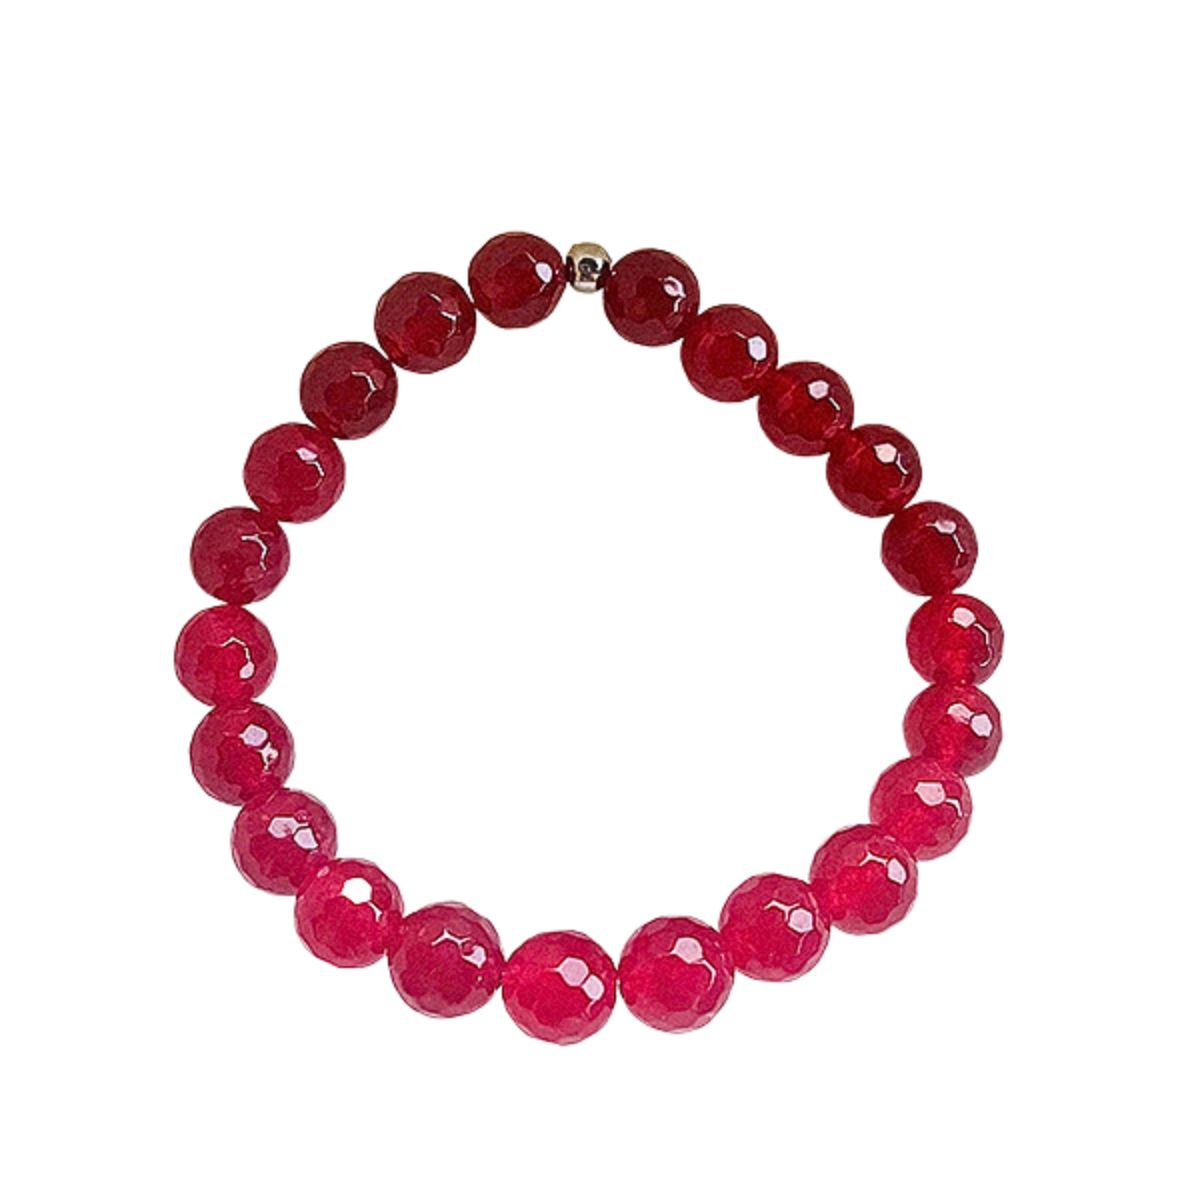 Featherly Red Jade Faceted Stacker Bracelet